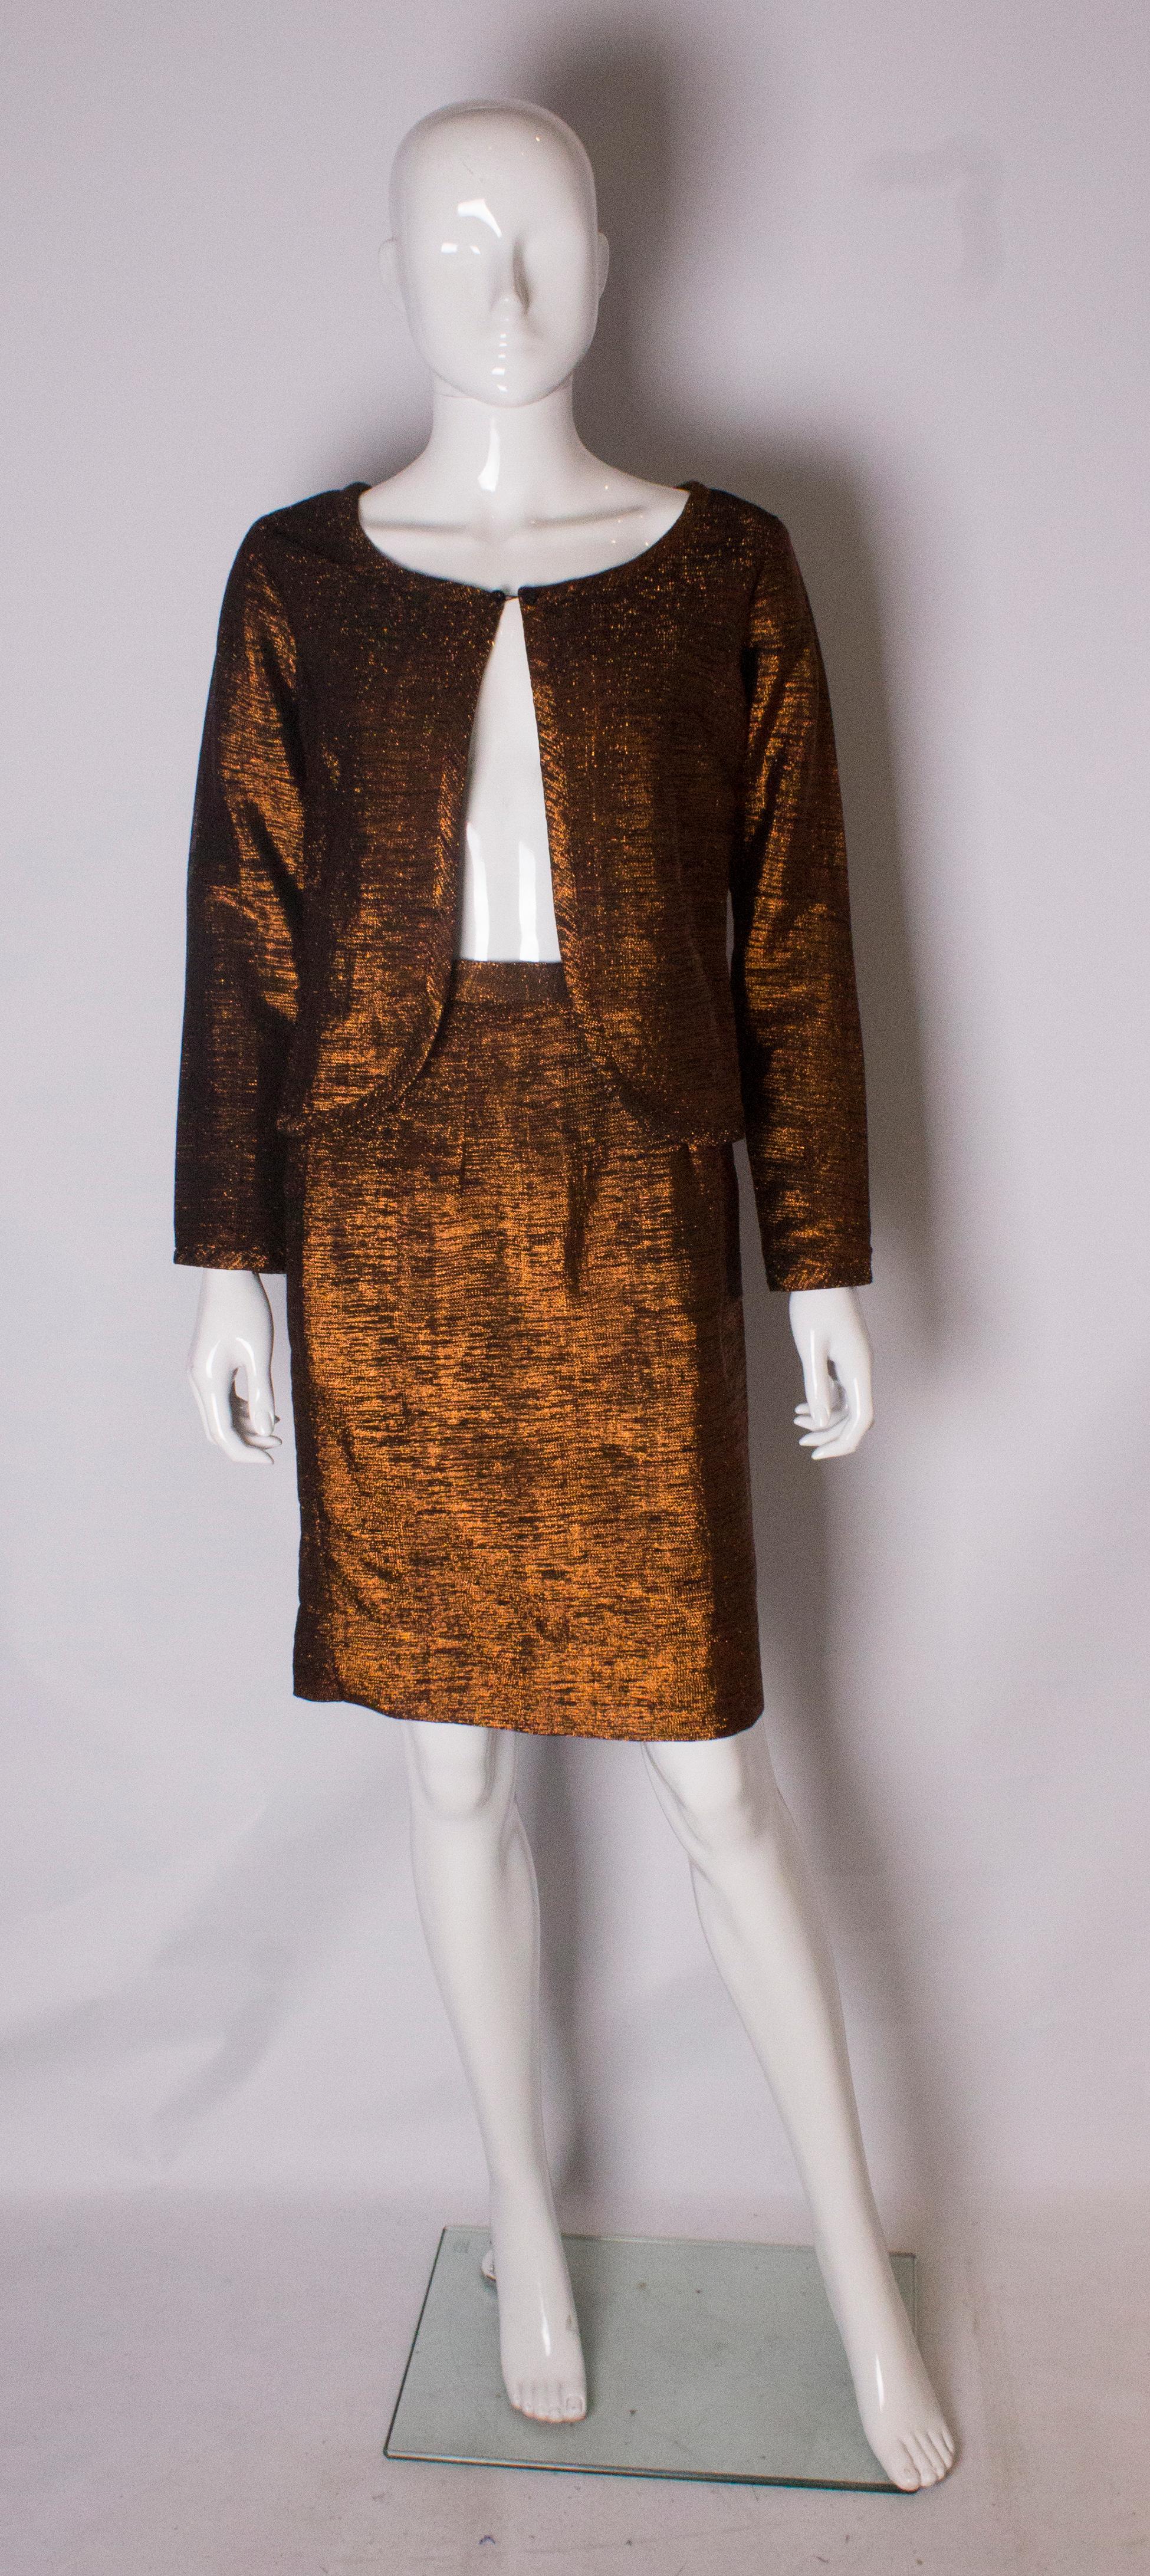 A chic and easy to wear cocktail suit in a bronze lurex. The jacket has a round neckline with fastening at the neck and a scoop hem. The jacket is lined. The skirt is fully lined and has a 3'' hem, should it need to be taken down.
Jacket bust